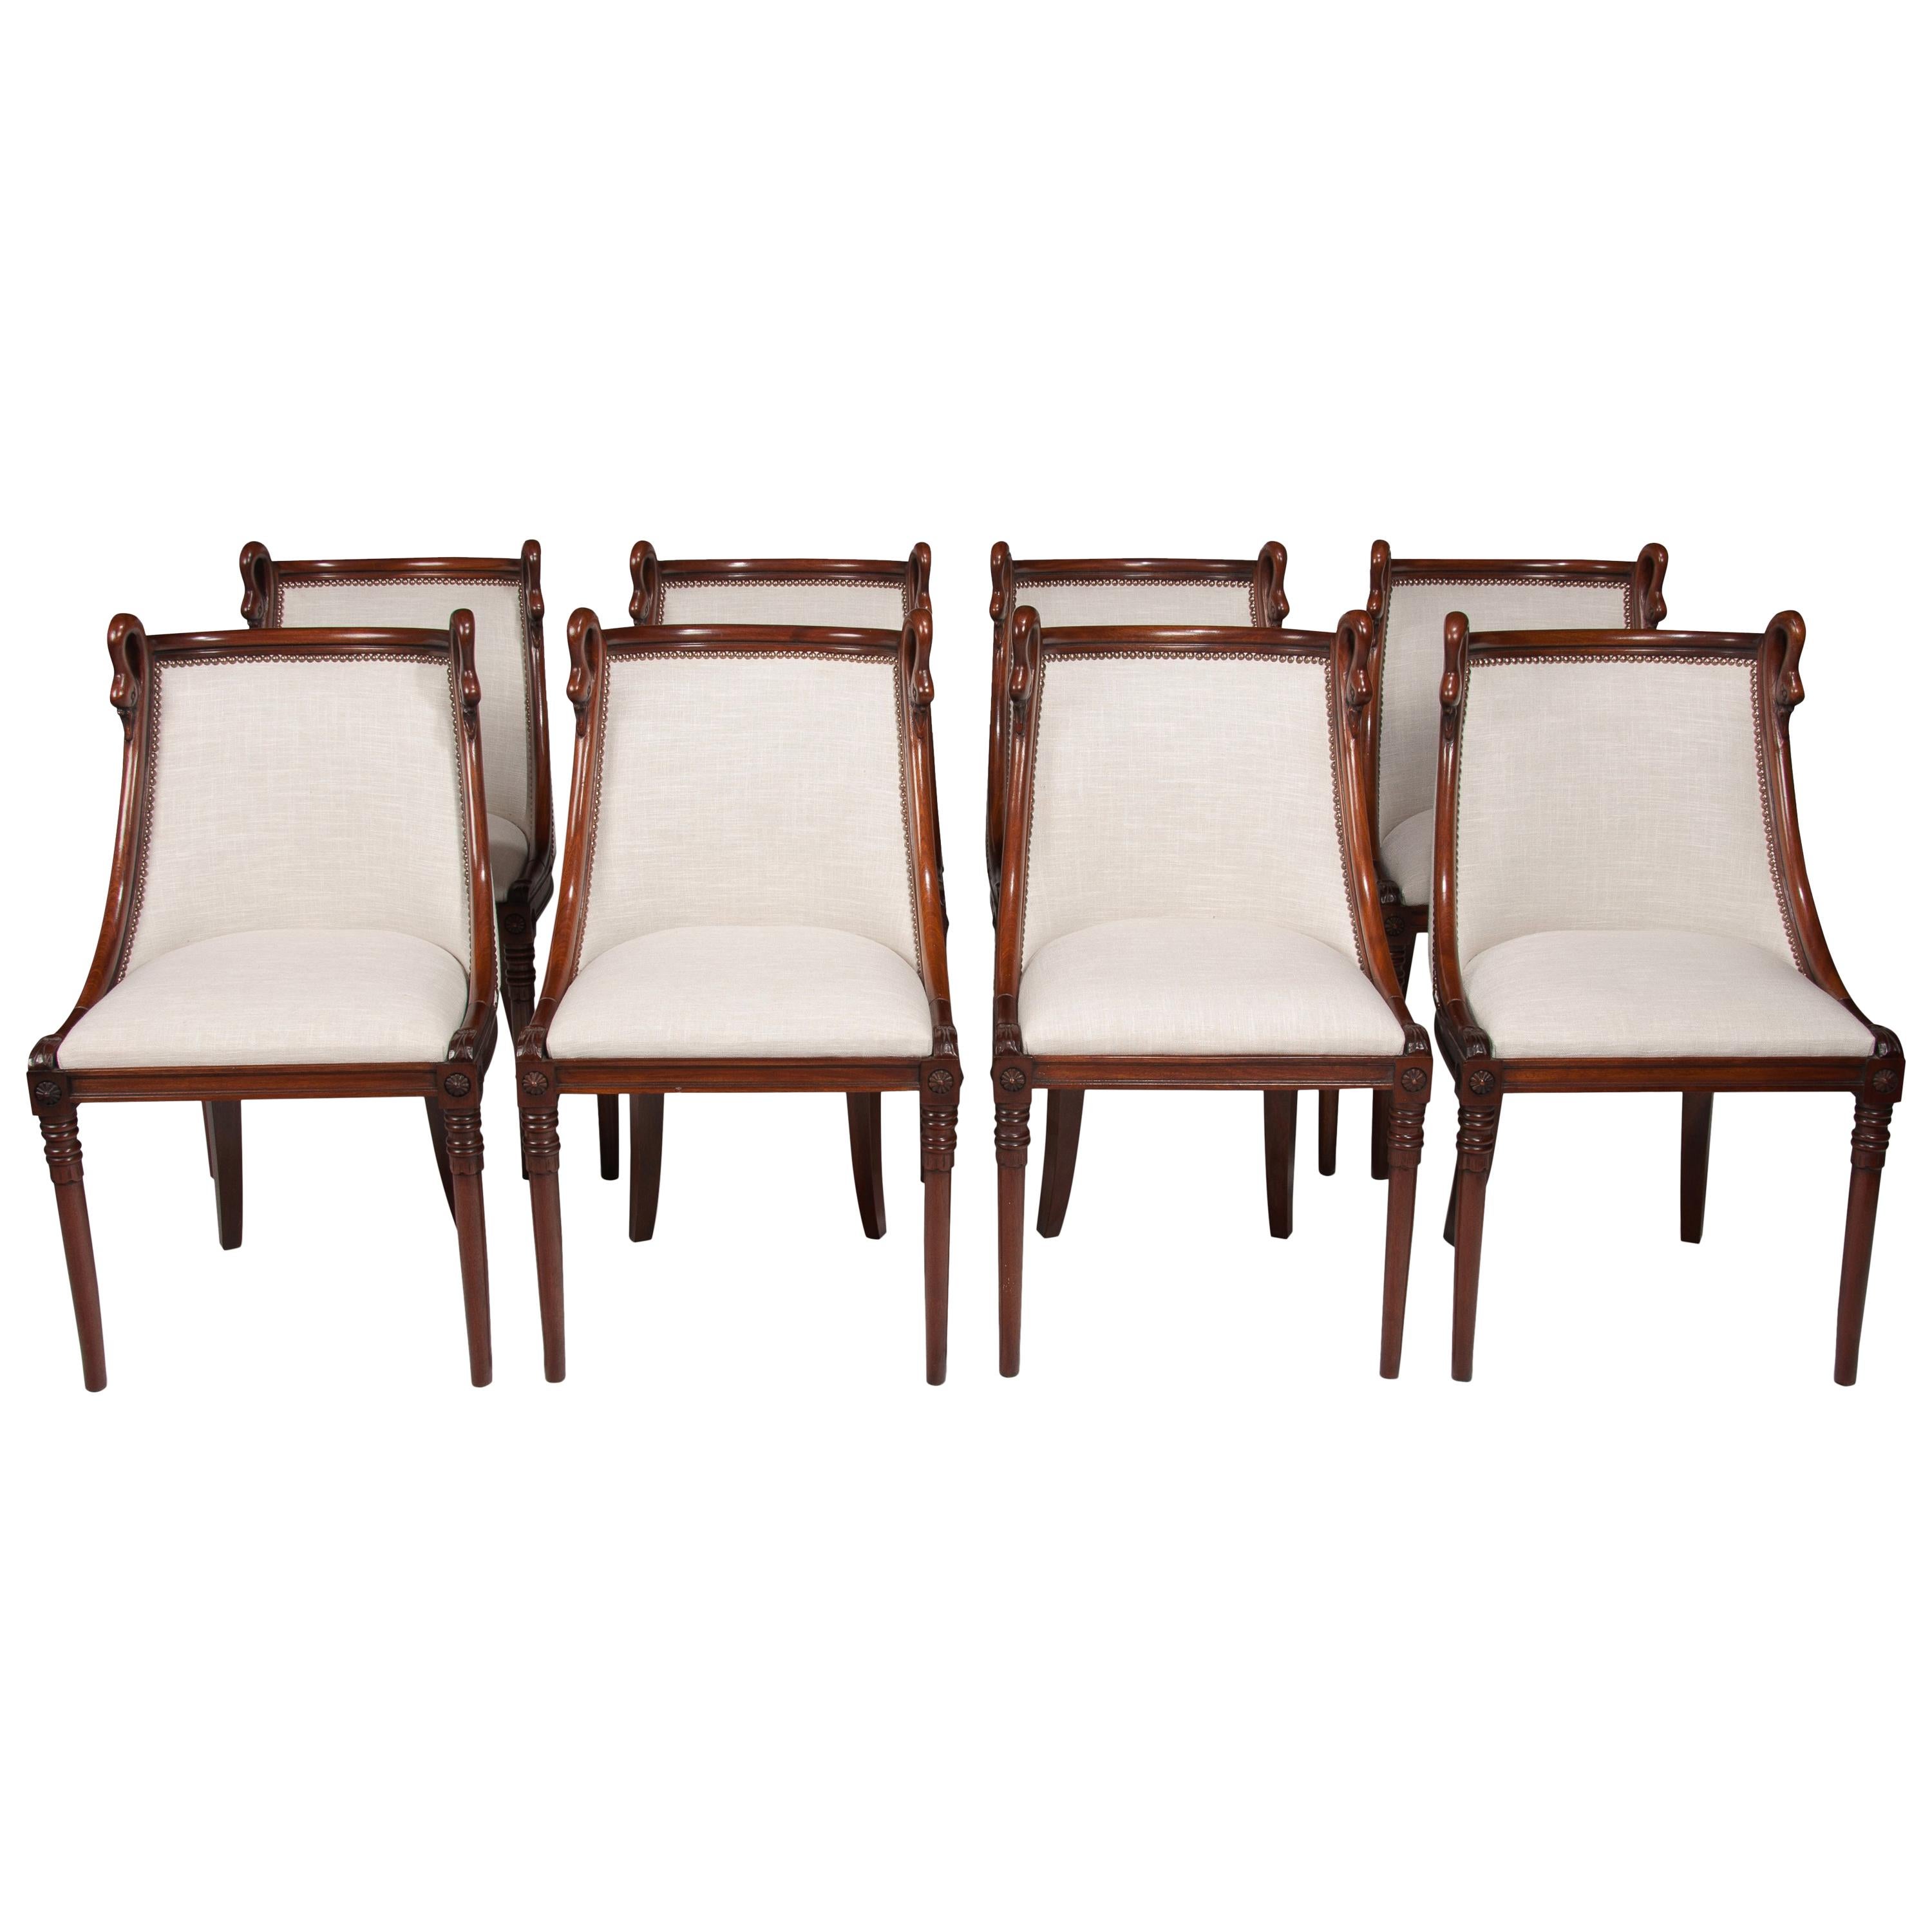 Set of 8 French 19th Century Empire Style Barrel Back Dining Chairs